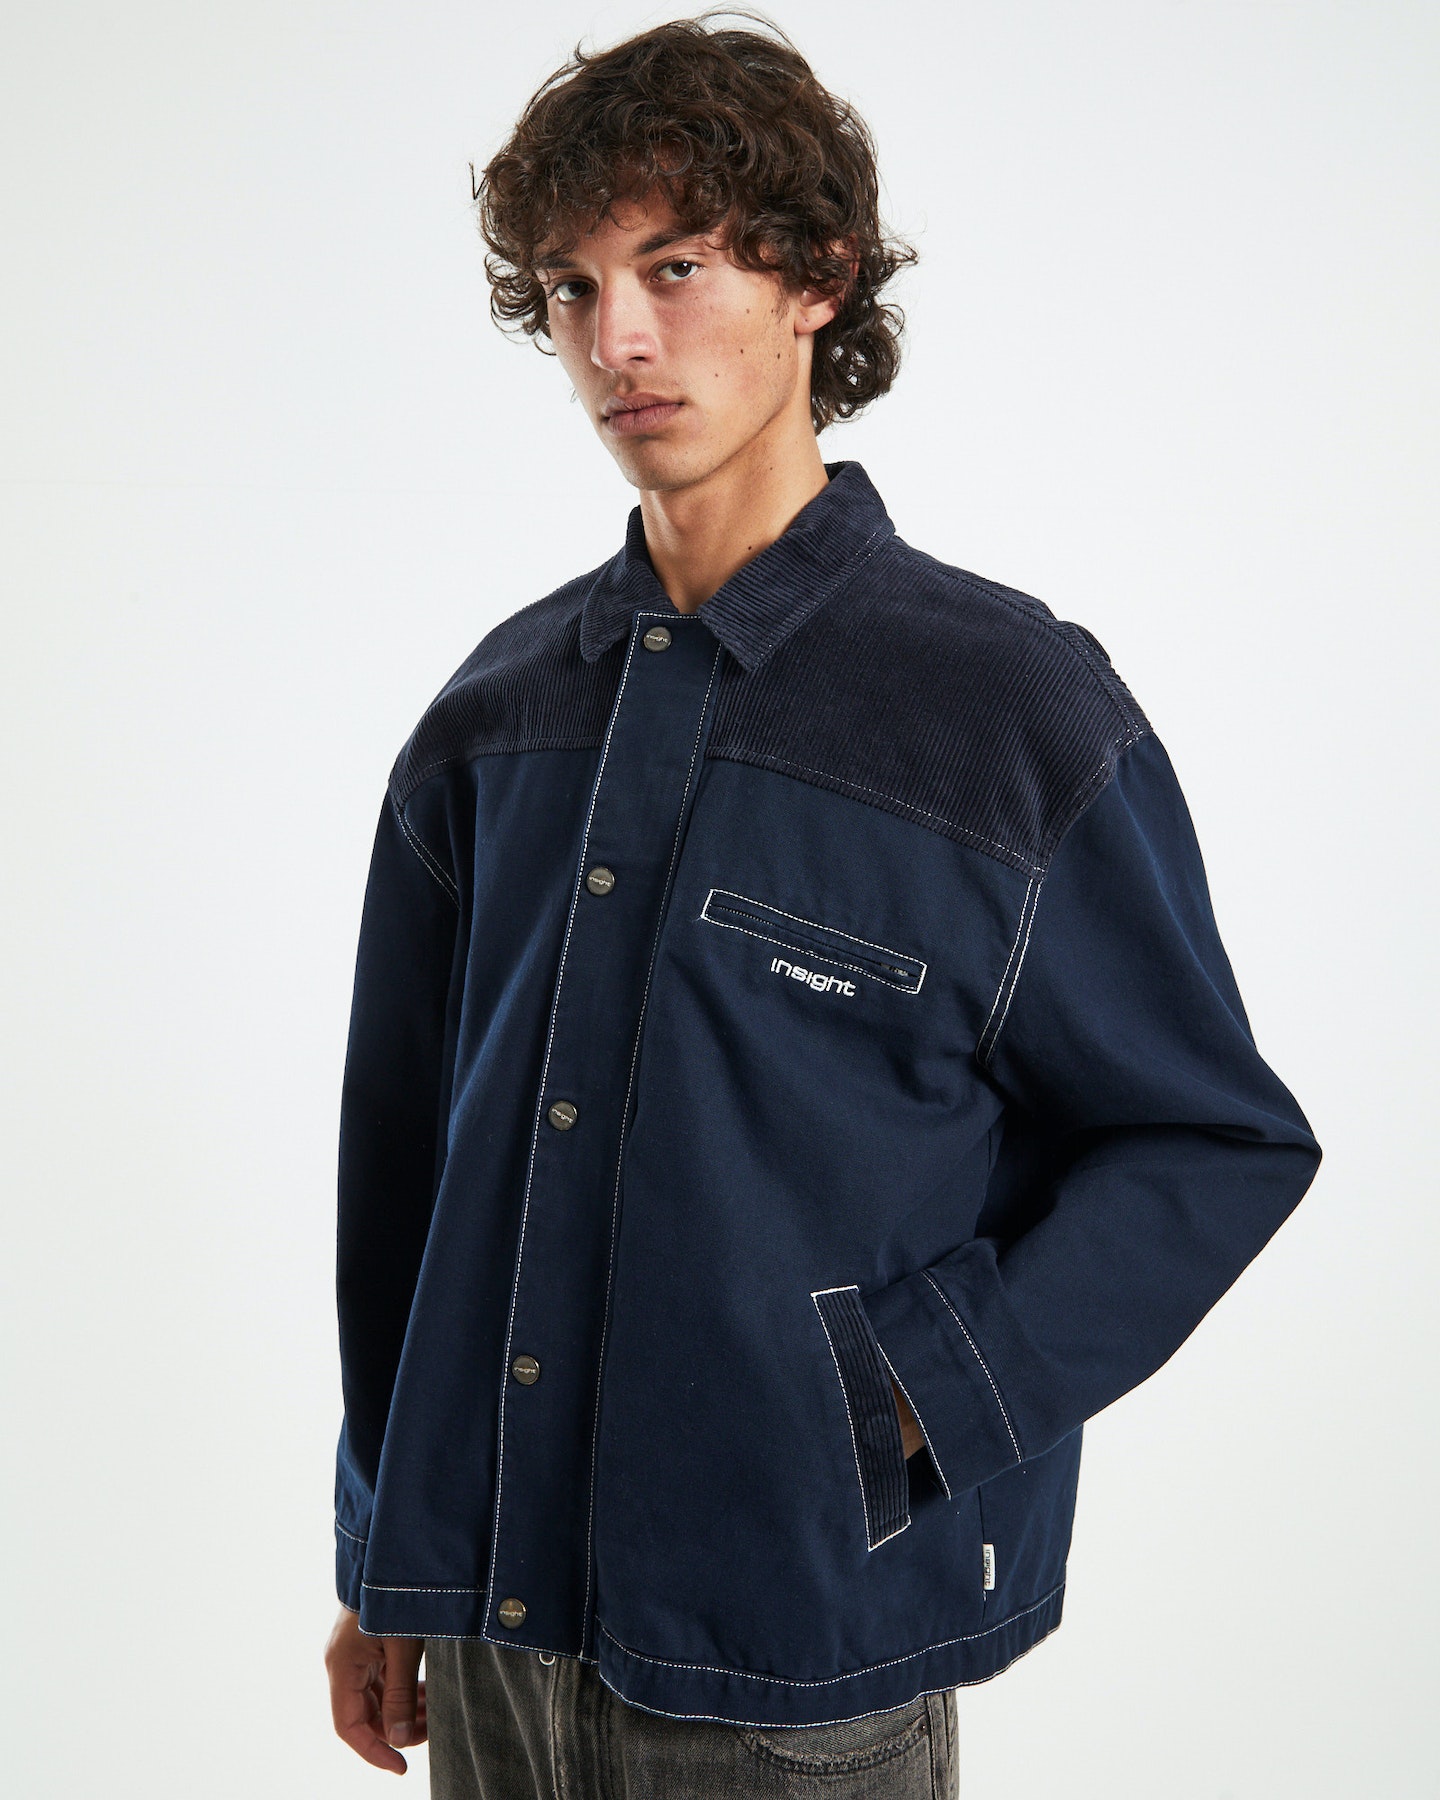 Insight Simmers Jacket - Navy | SurfStitch